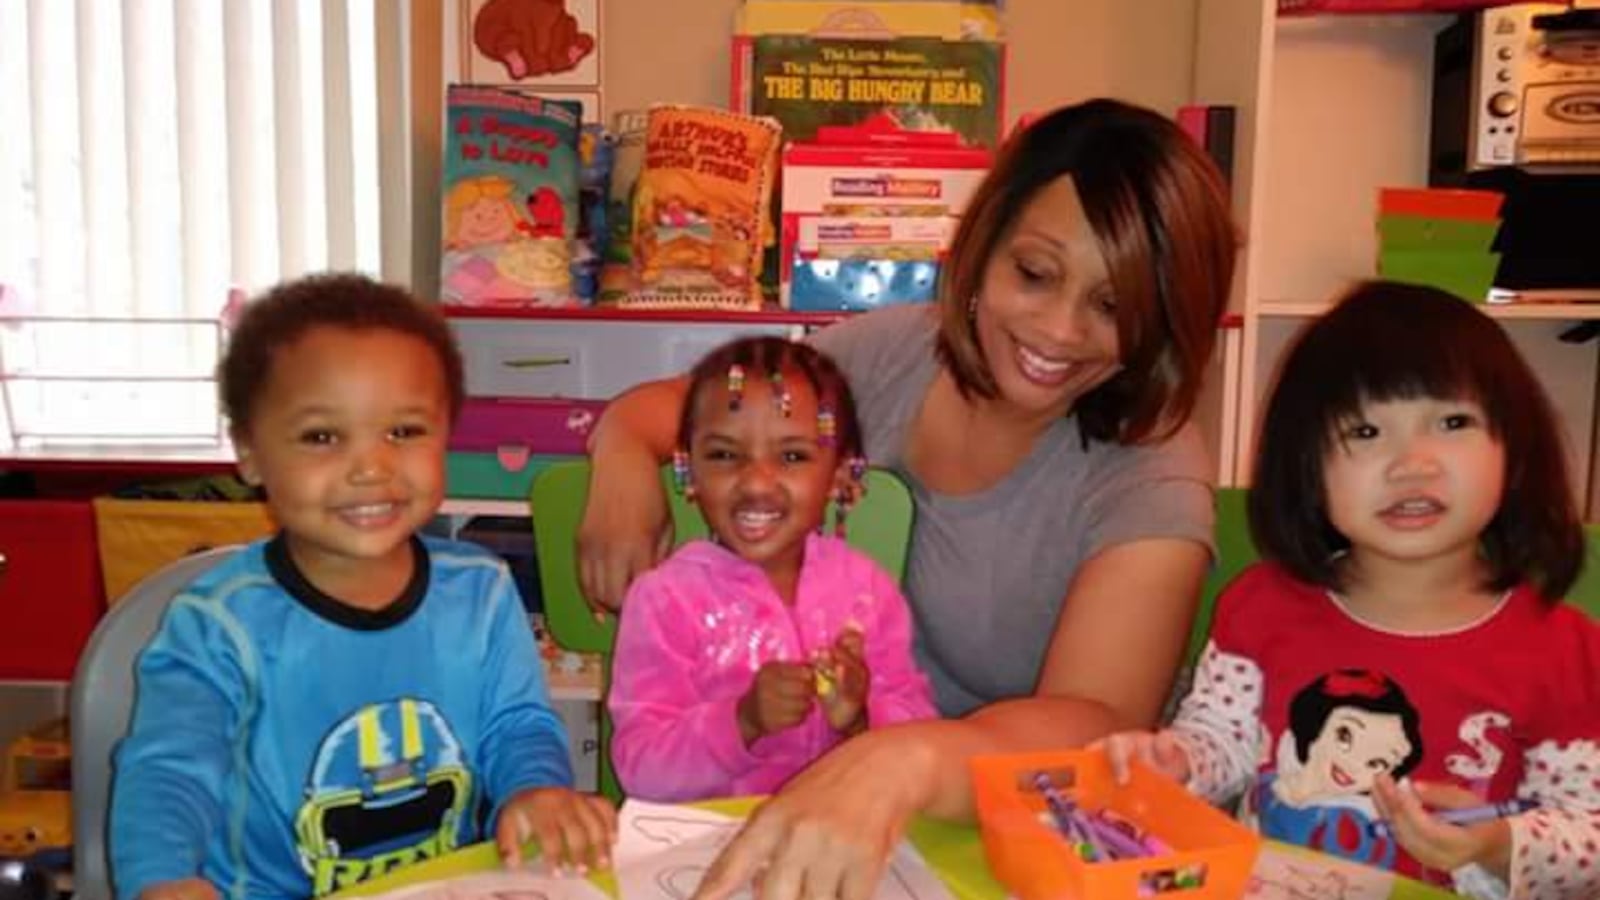 Crystal Jeter runs Creative Hearts, a preschool and childcare center in the Brightmoor neighborhood on Detroit's westside